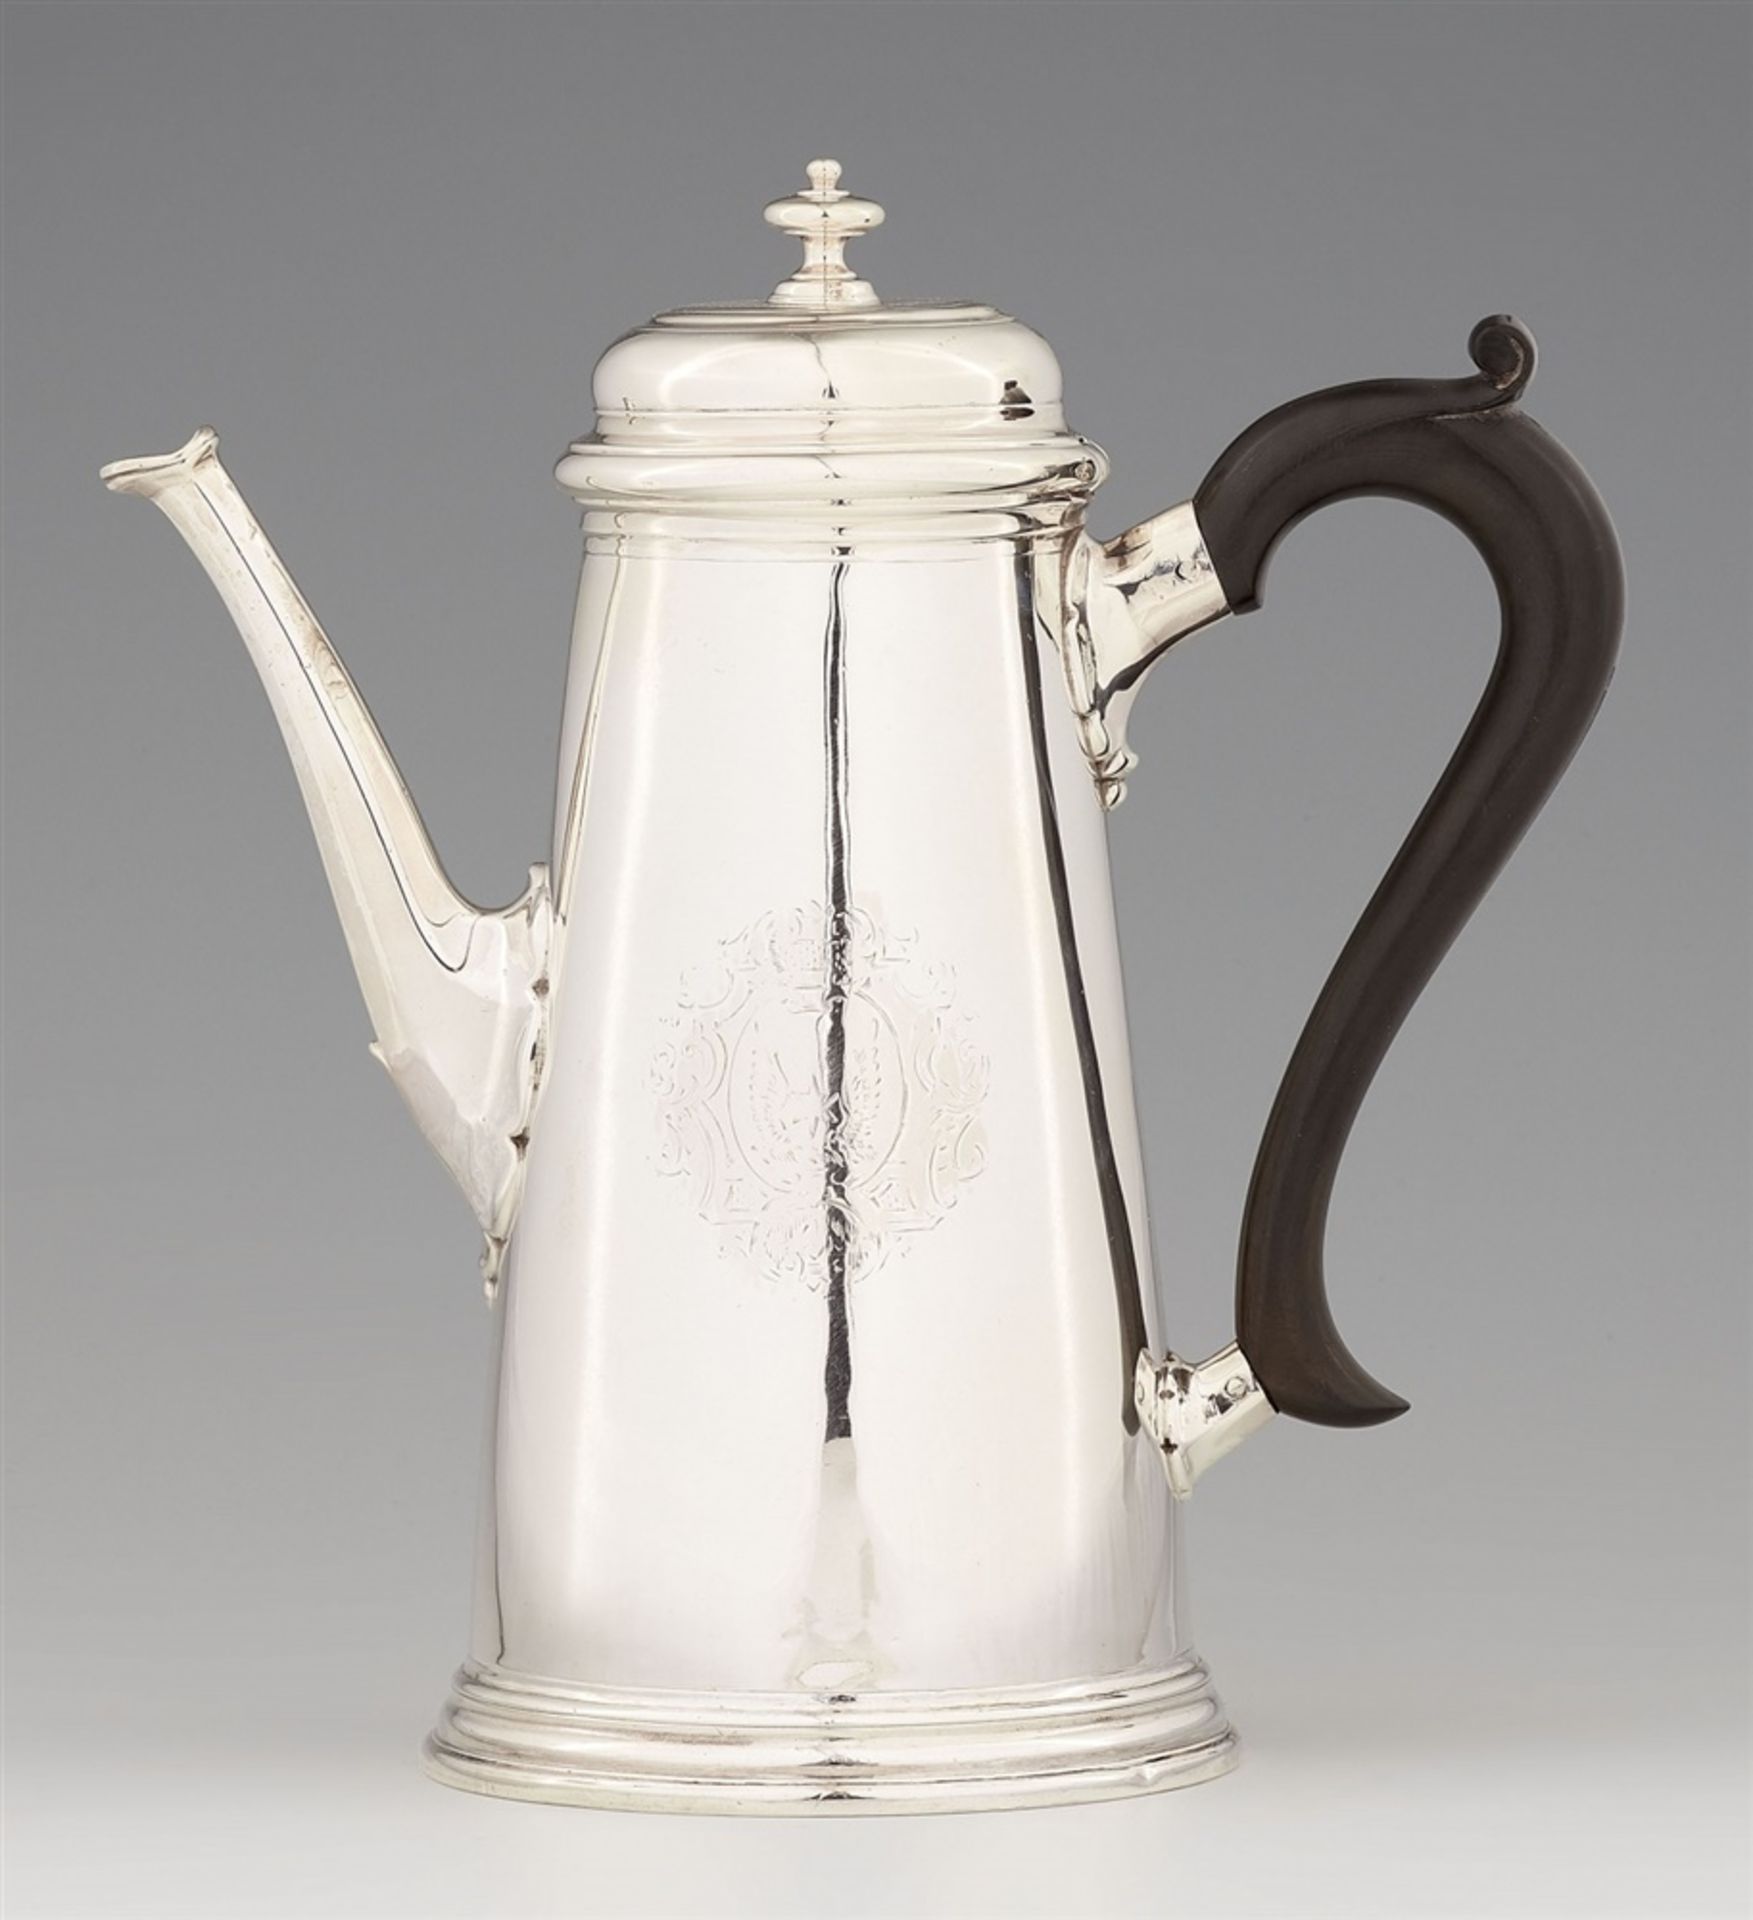 A George II silver coffee potCylindrical coffee pot with a wooden handle and hinged lid, engraved